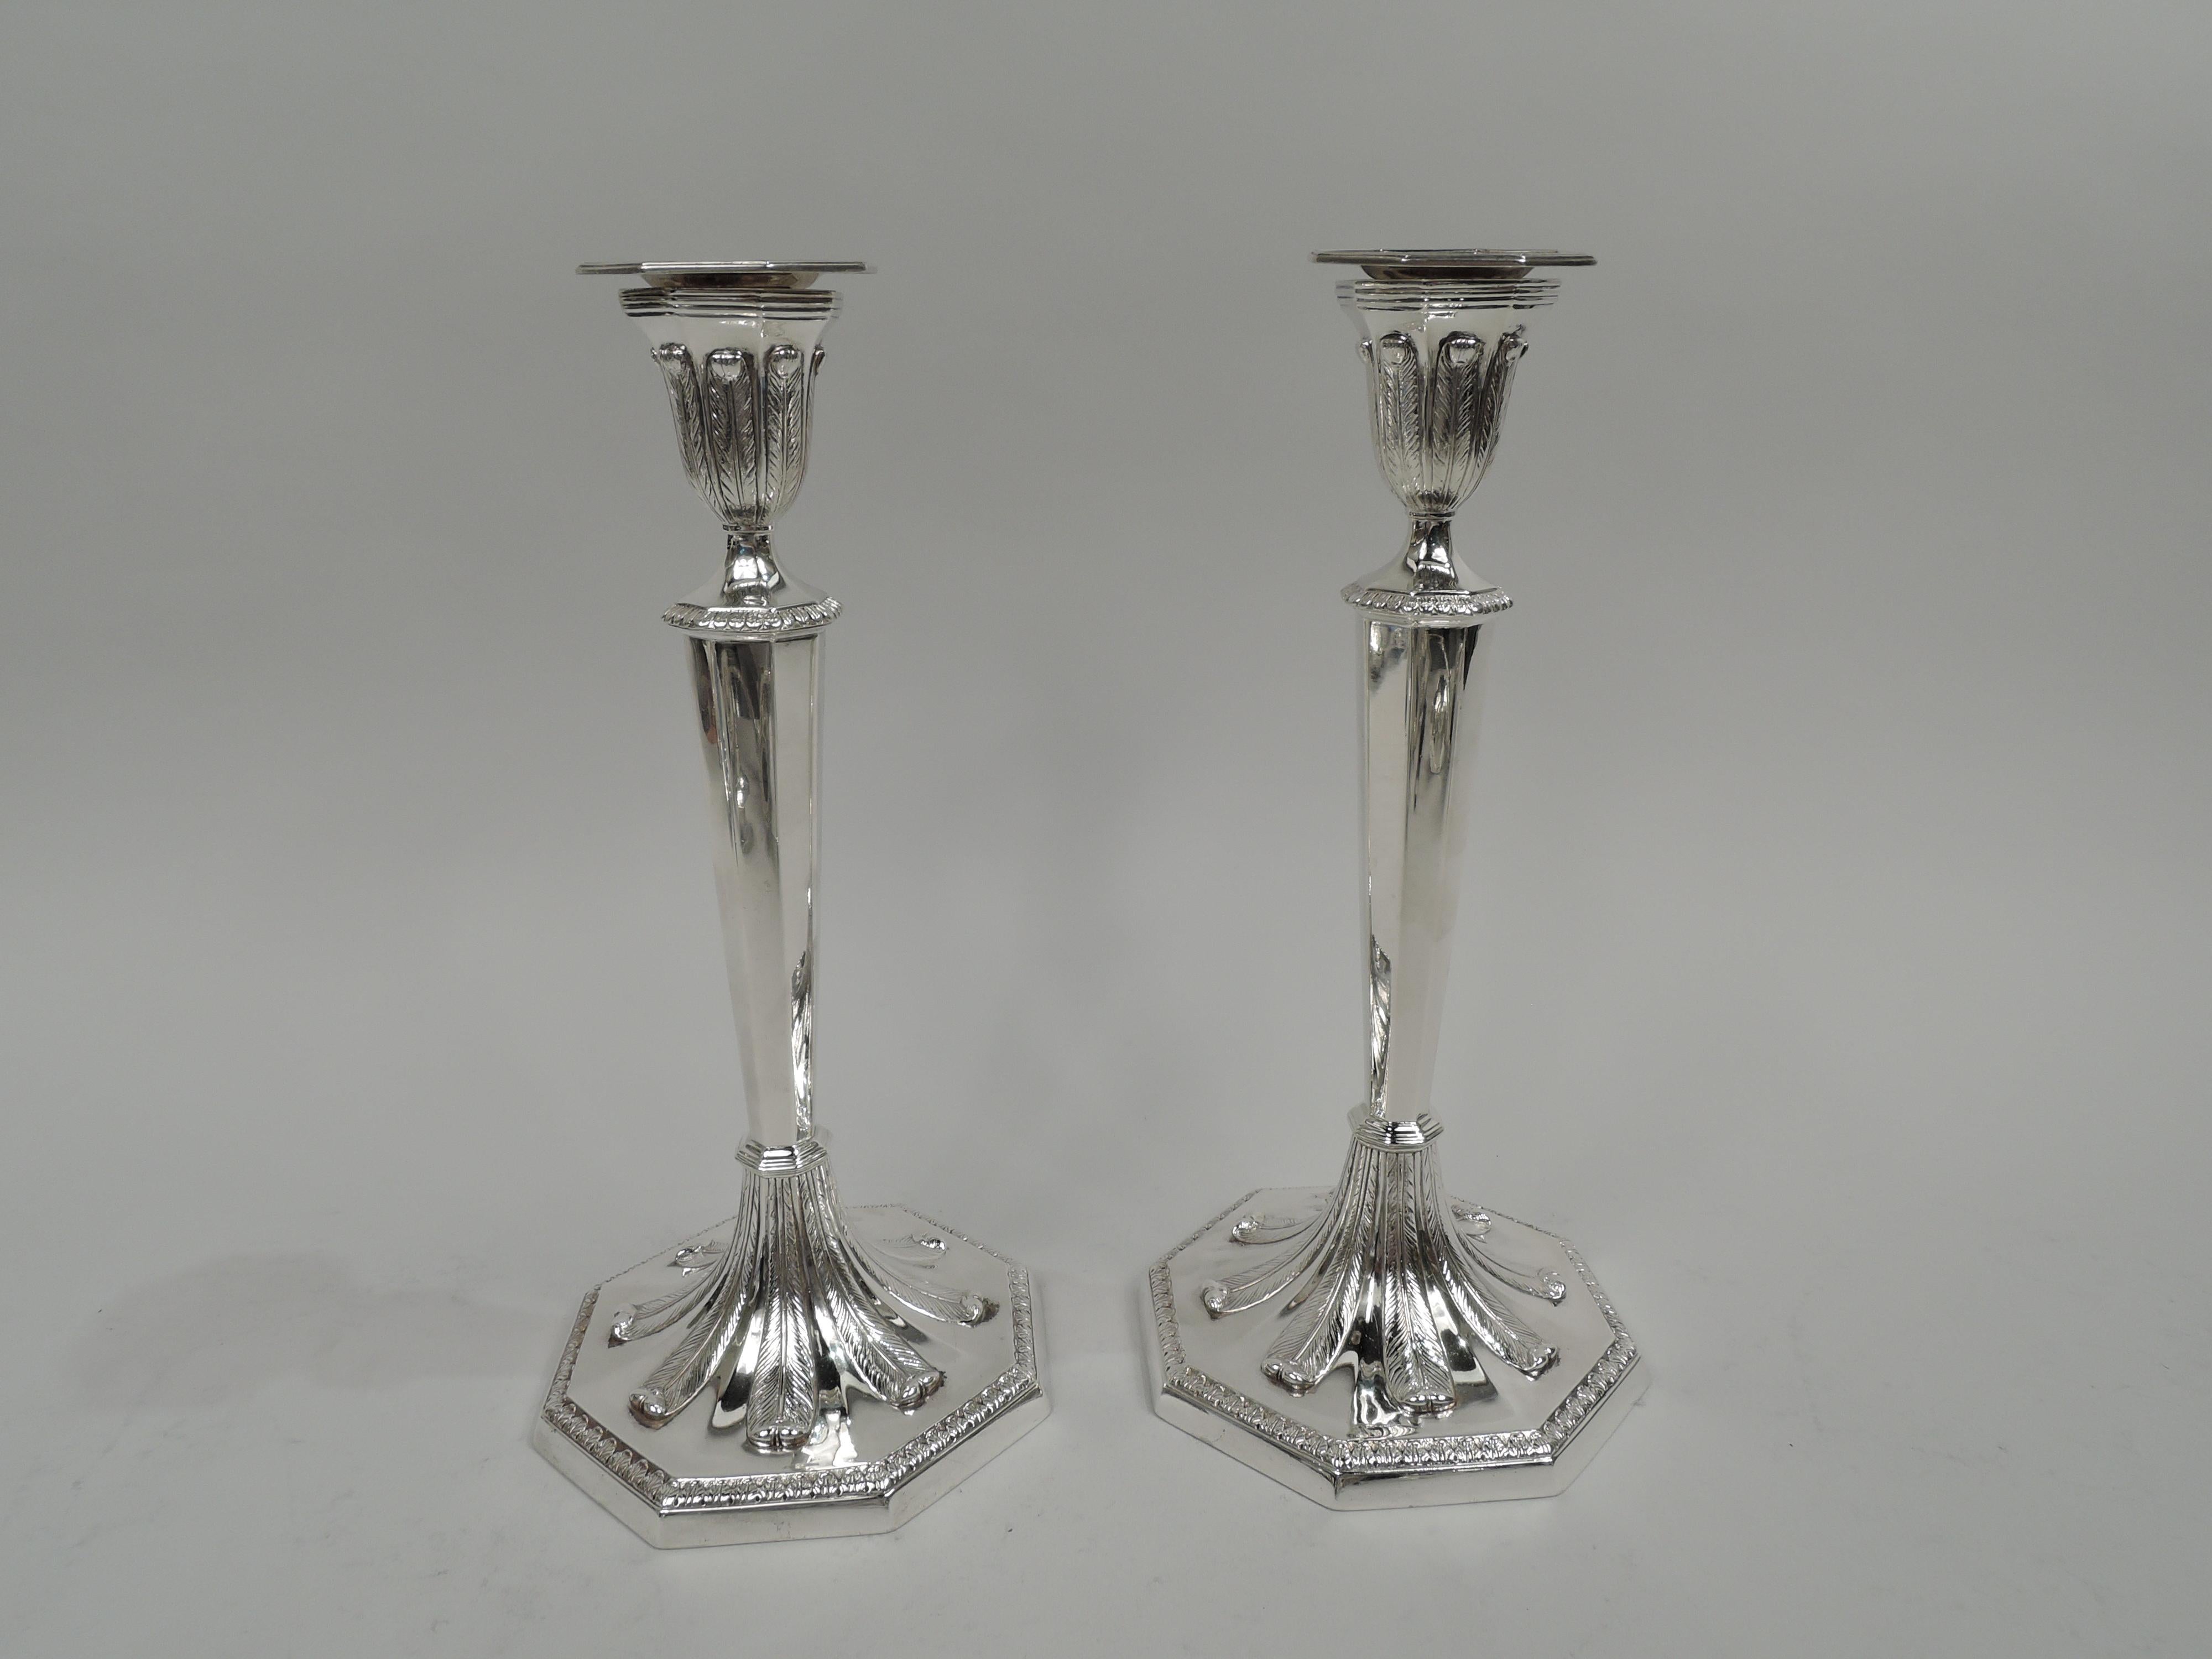 American Pair of Antique Tiffany English Neoclassical Sterling Silver 3-Light Candelabra For Sale